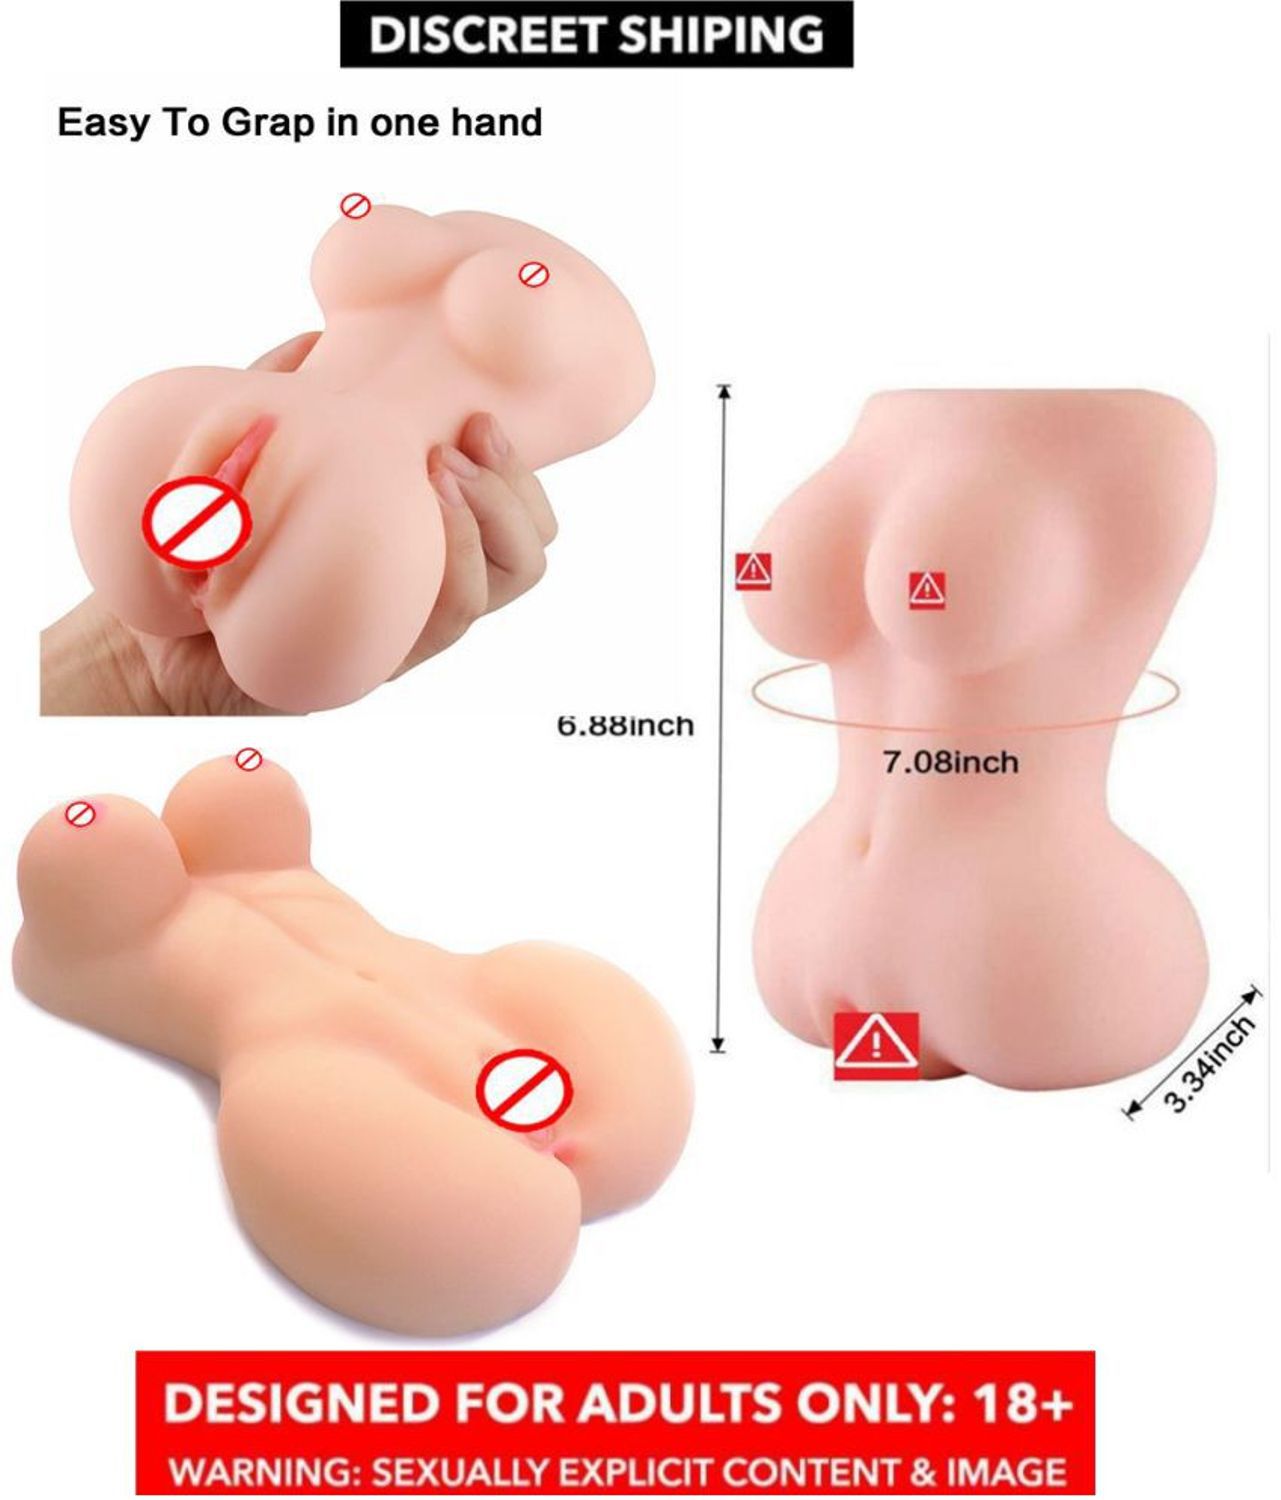     			Half Body Silicone Pocket Pussy Sex Doll With Breast And Anal For Masturbation Toy By KAMAHOUSE